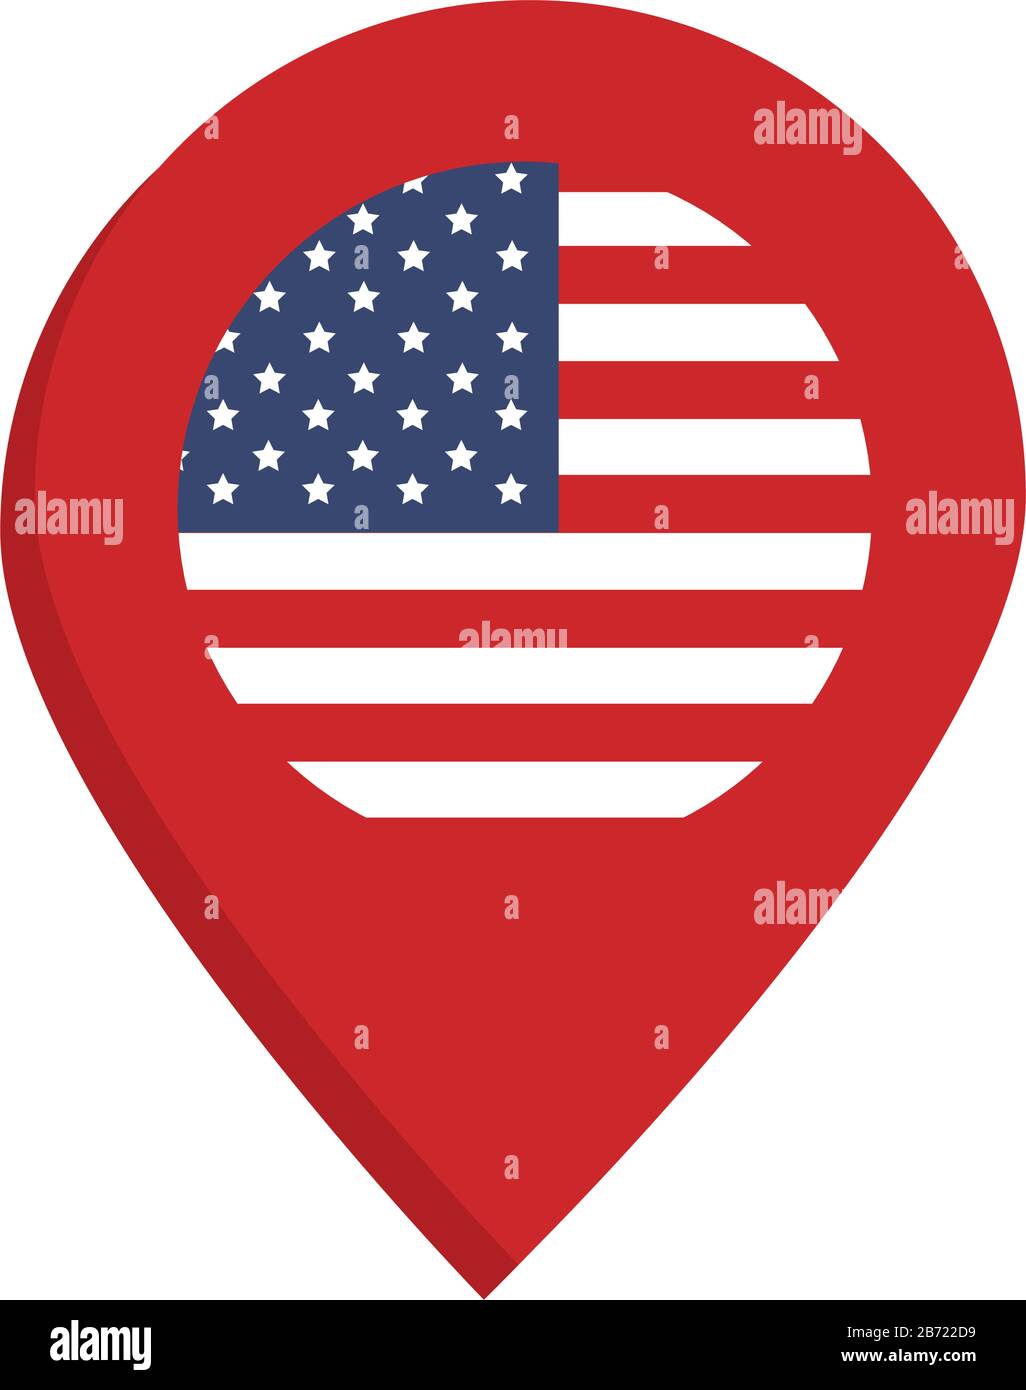 memorial day location pointer flag american celebration vector illustration flat style icon Stock Vector